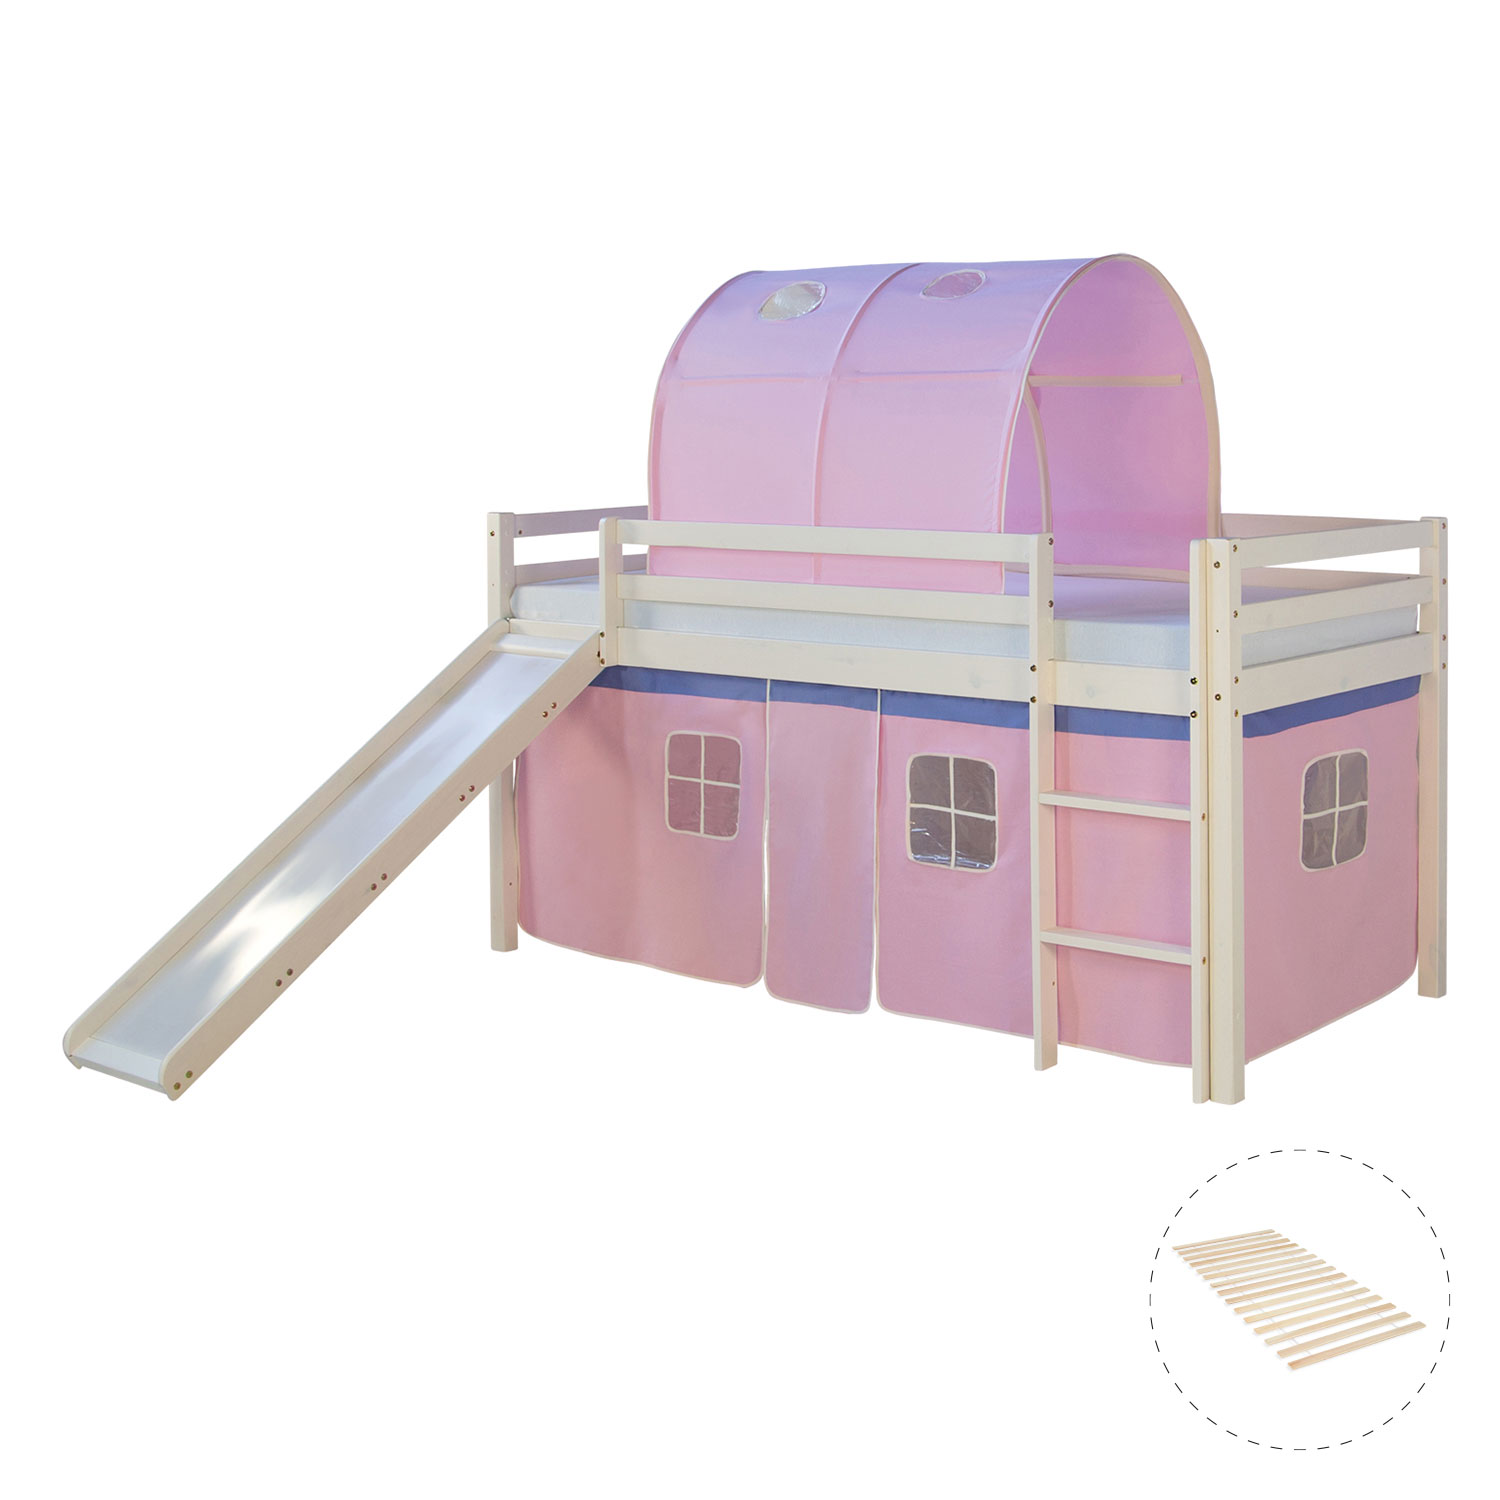 Loftbed with Slide 90x200 cm Slats Bunk bed Childrens bed Solid Pine Wood Curtain Tunnel Pink